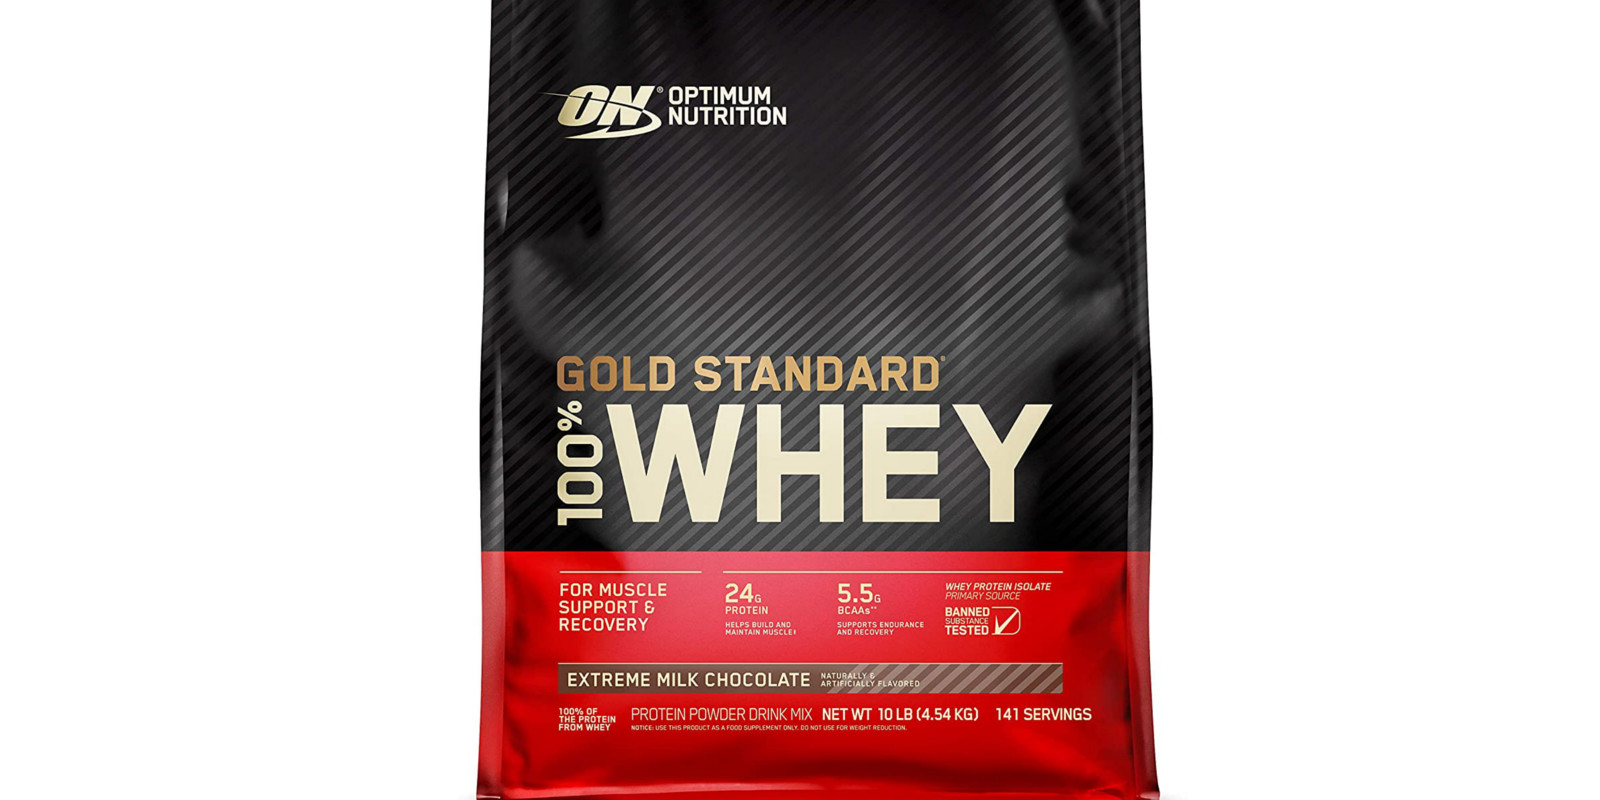 ON Gold Standard Whey: 16 Proven Ways To Verify Your Jar